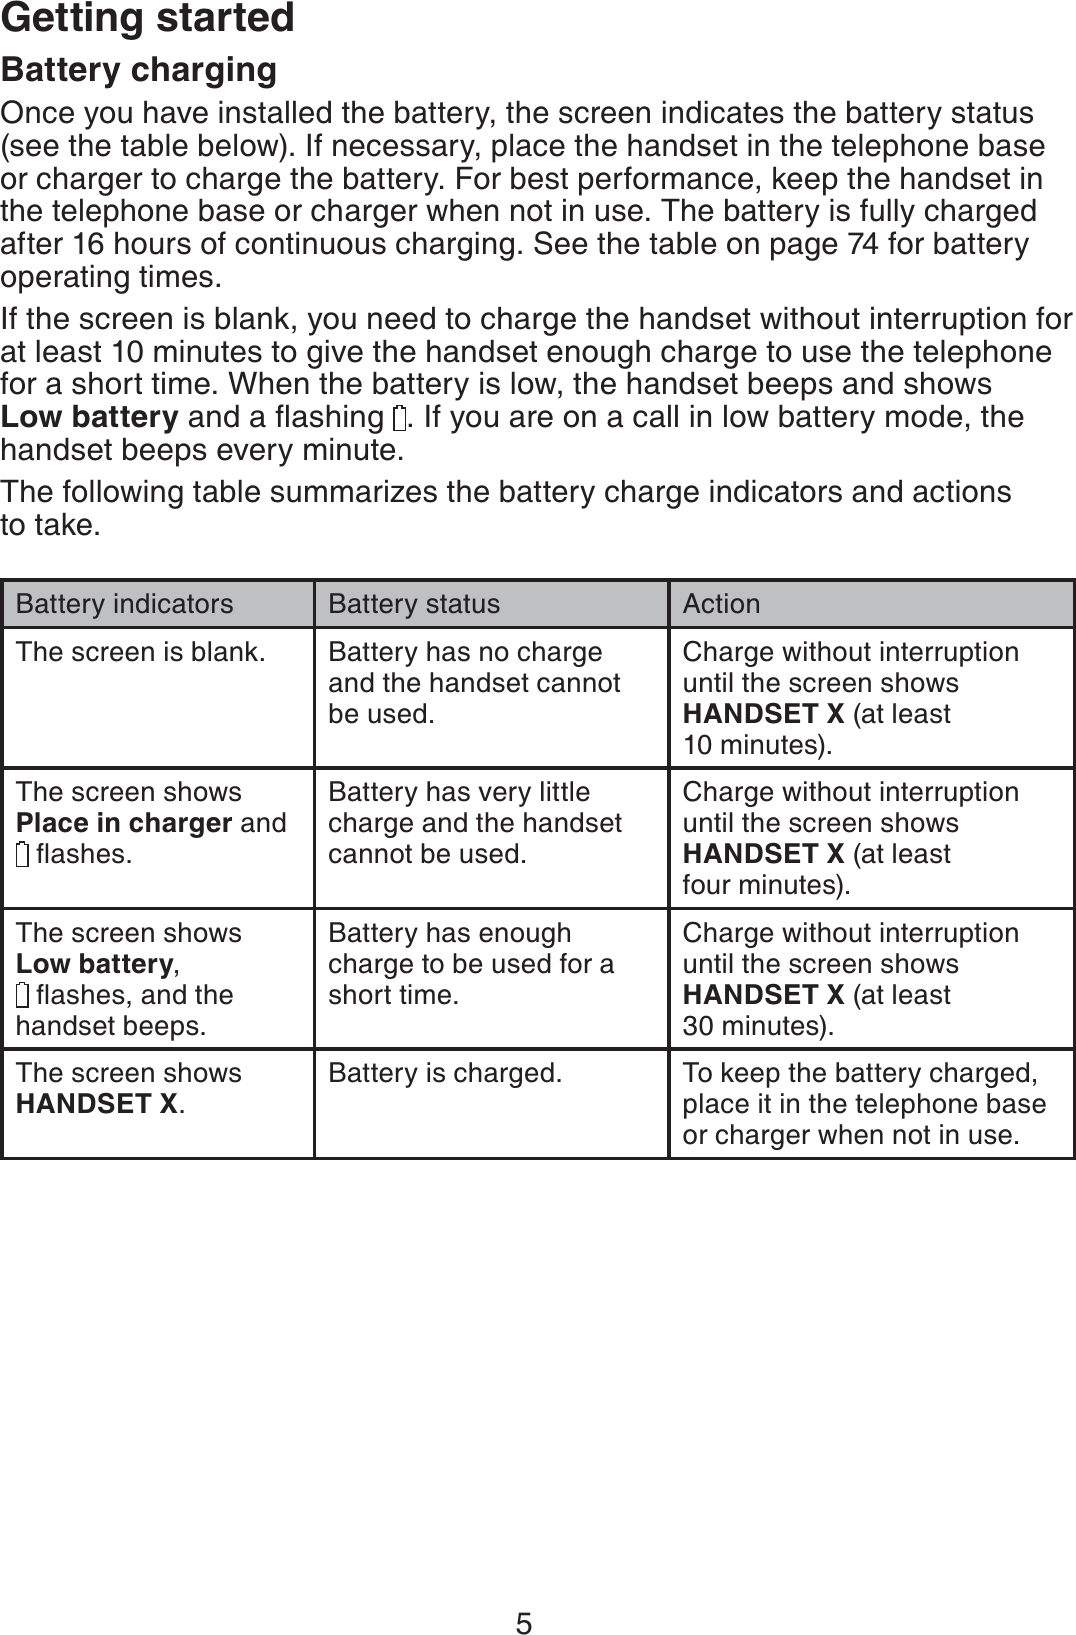 5Getting startedBattery chargingOnce you have installed the battery, the screen indicates the battery status (see the table below). If necessary, place the handset in the telephone base or charger to charge the battery. For best performance, keep the handset in the telephone base or charger when not in use. The battery is fully charged after 16 hours of continuous charging. See the table on page 74 for battery operating times.If the screen is blank, you need to charge the handset without interruption for at least 10 minutes to give the handset enough charge to use the telephone for a short time. When the battery is low, the handset beeps and shows Low batteryCPFCƀCUJKPI . If you are on a call in low battery mode, the handset beeps every minute.The following table summarizes the battery charge indicators and actions to take.Battery indicators Battery status ActionThe screen is blank. Battery has no charge and the handset cannot be used.Charge without interruption until the screen shows HANDSET X (at least 10 minutes).The screen shows Place in charger and ƀCUJGUBattery has very little charge and the handset cannot be used.Charge without interruption until the screen shows HANDSET X (at least four minutes).The screen shows Low battery,ƀCUJGUCPFVJGhandset beeps.Battery has enough charge to be used for a short time.Charge without interruption until the screen shows HANDSET X (at least 30 minutes).The screen shows HANDSET X.Battery is charged. To keep the battery charged, place it in the telephone base  or charger when not in use.